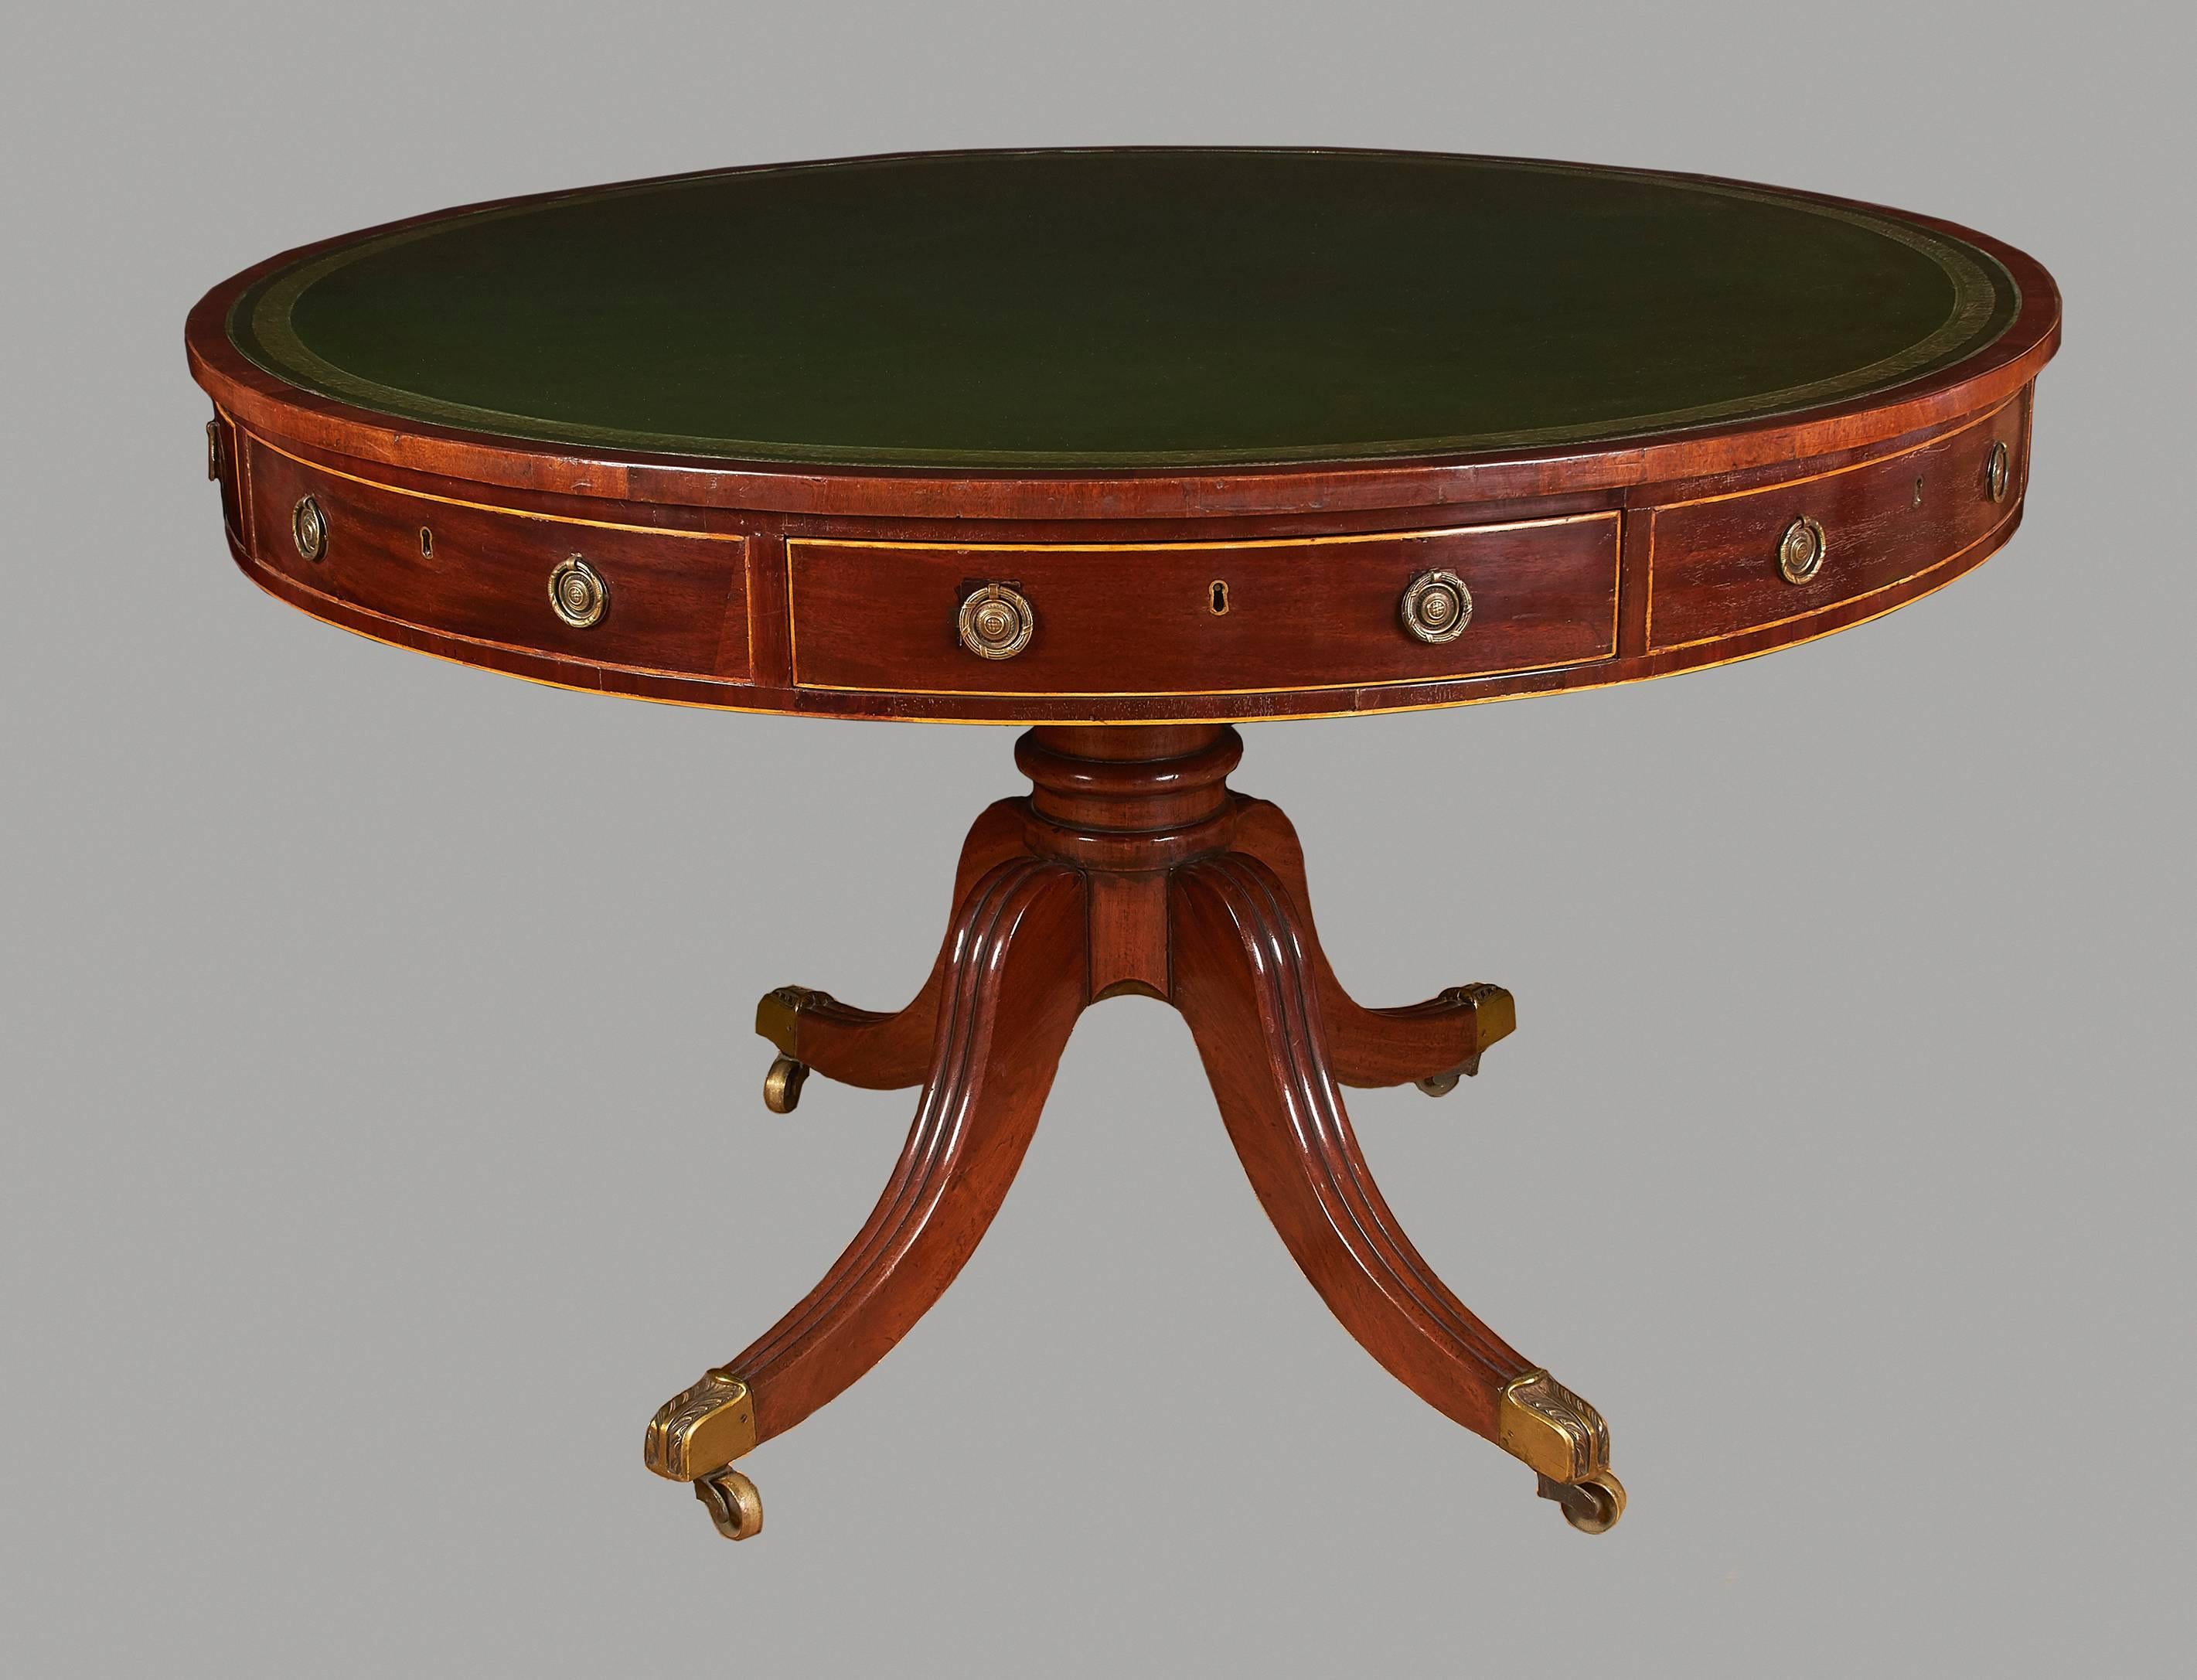 English Regency Mahogany Drum Table with Four Drawers